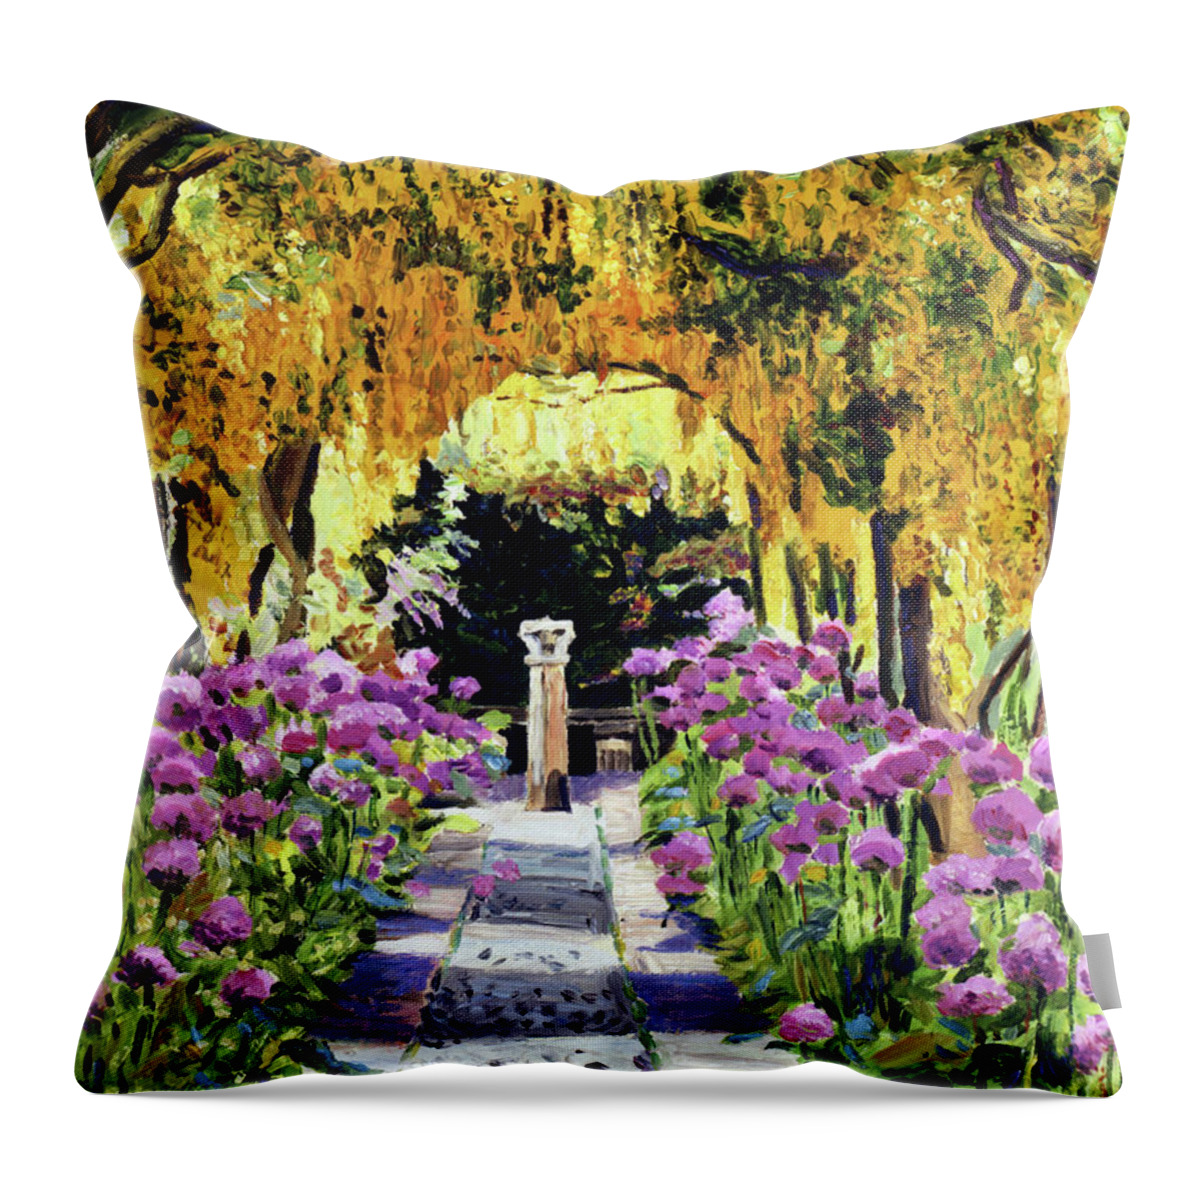 Gardens Throw Pillow featuring the painting Golden Walk #1 by David Lloyd Glover